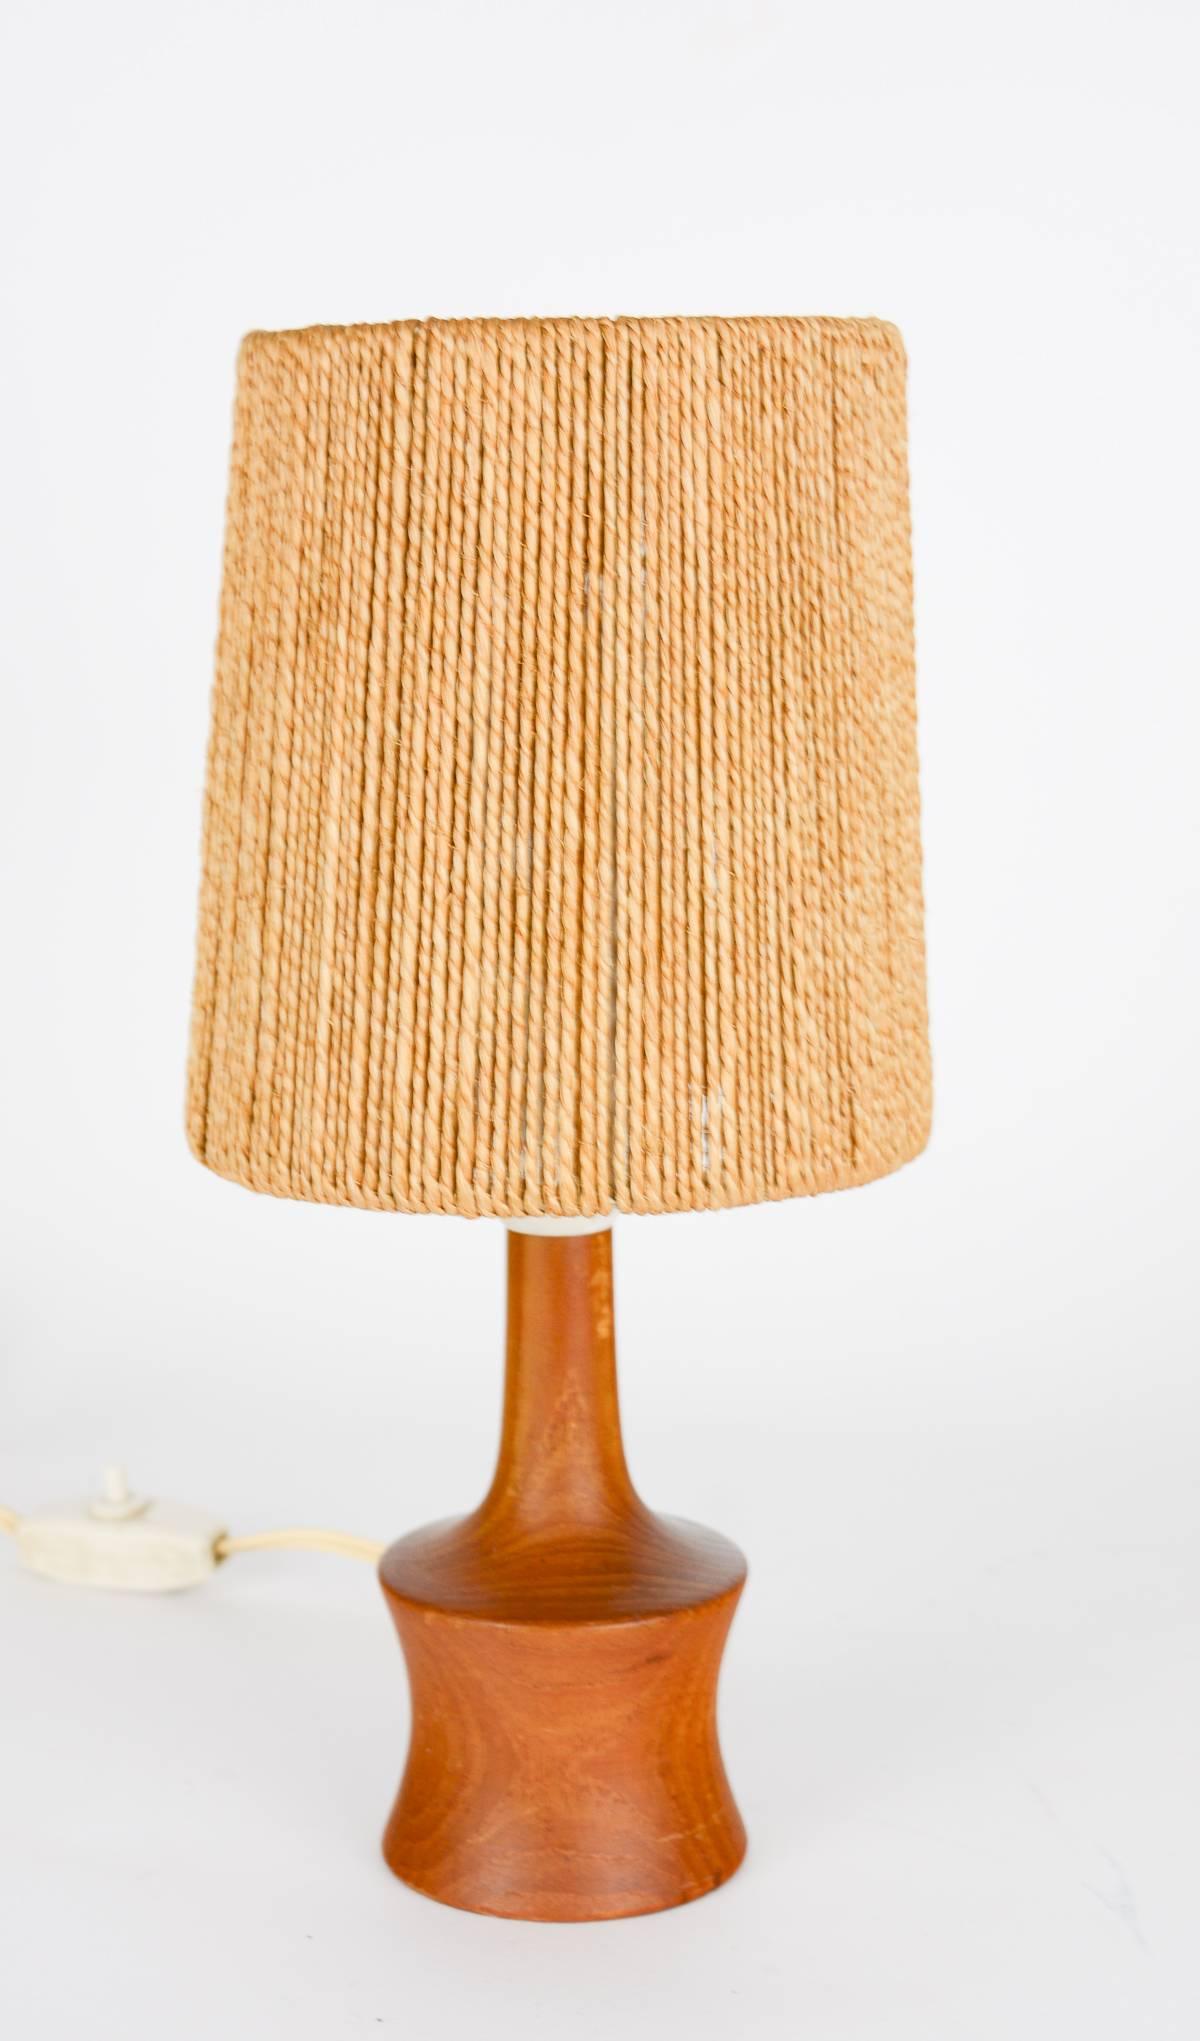 A delightful petite teak lamp with jute strand shade by Jørgen Gammelgaard.

Gammelgaard was trained as a cabinetmaker at the Copenhagen School of Arts and Crafts and served an apprenticeship at C. B. Hansen's workshop in Copenhagen, and later